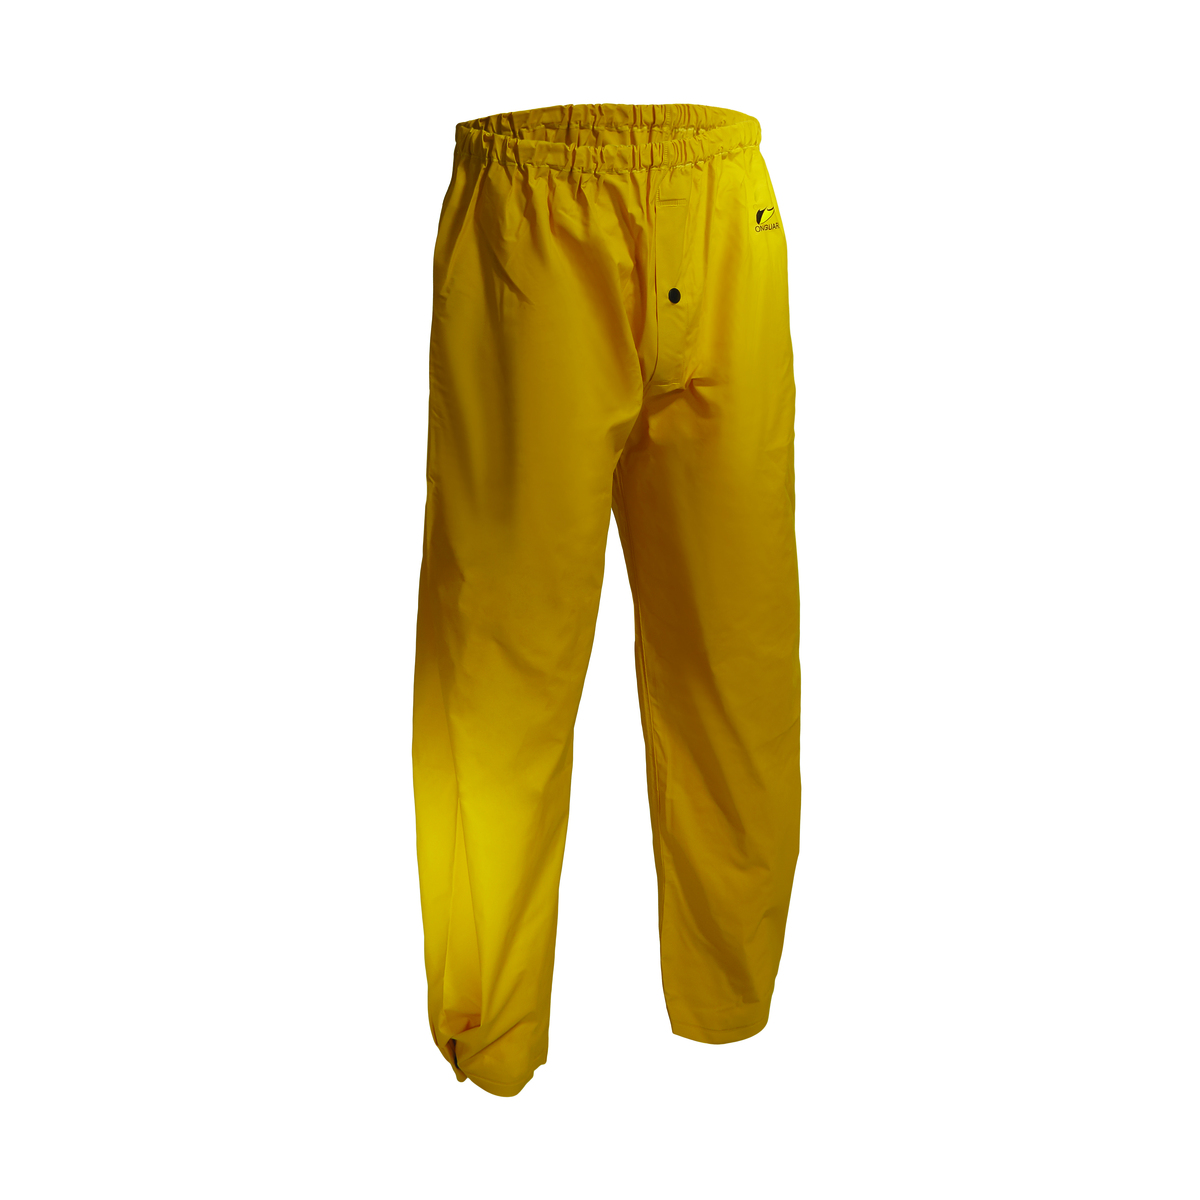 Dunlop® Protective Footwear 2X Yellow Sitex .35 mm Polyester/PVC Pants